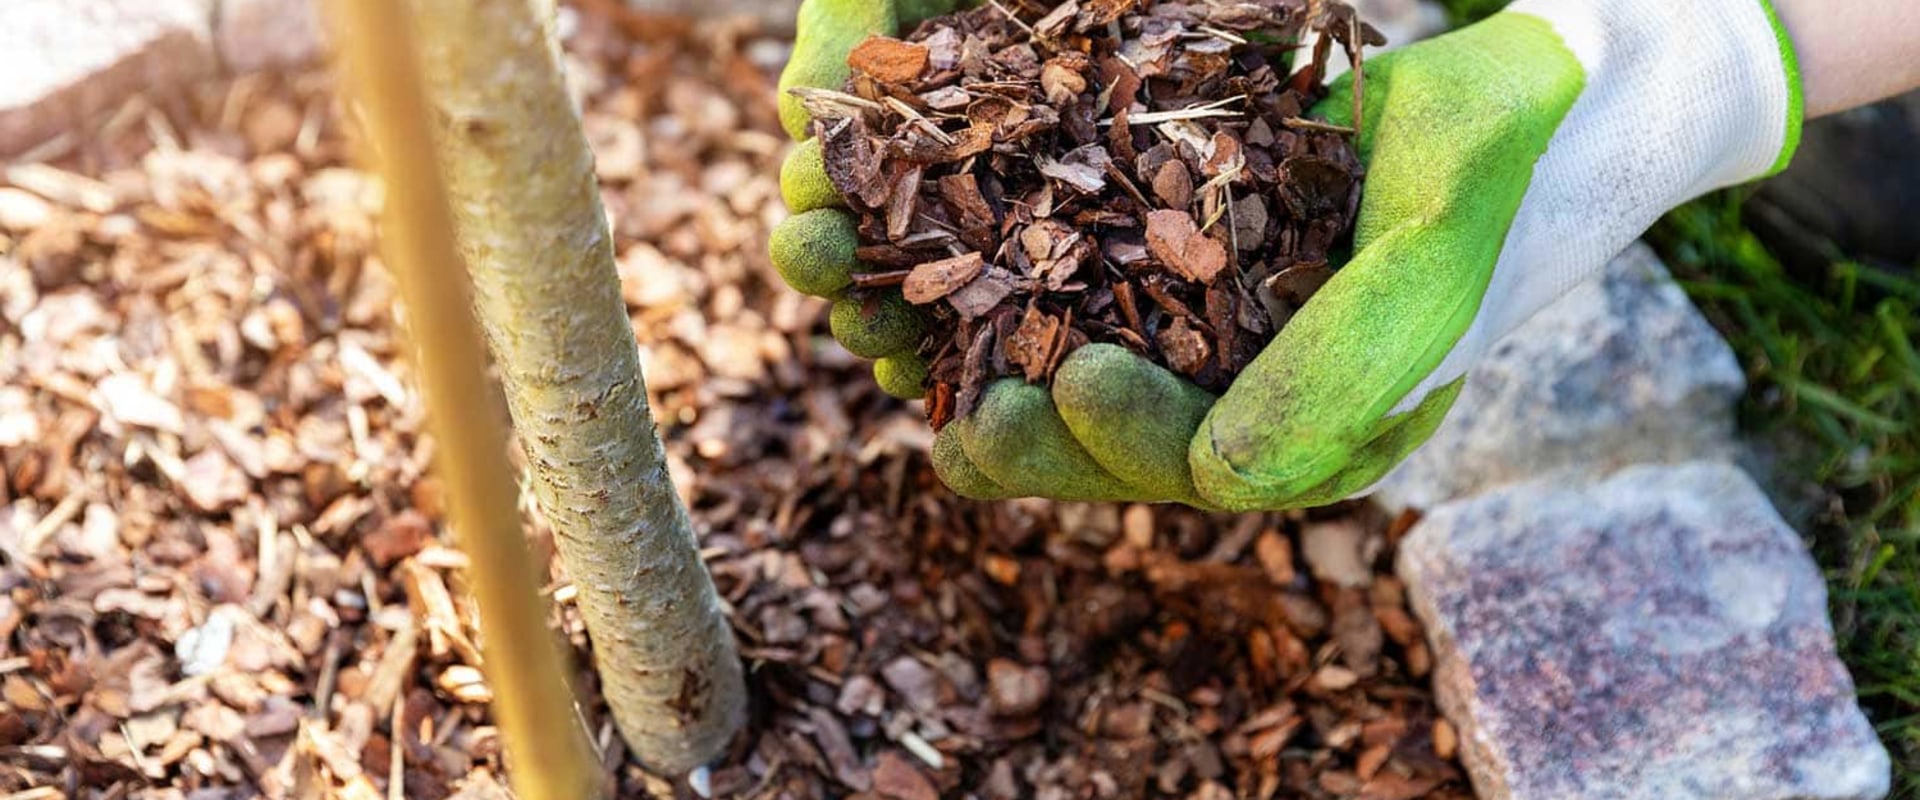 Best Practices for Mulching Trees